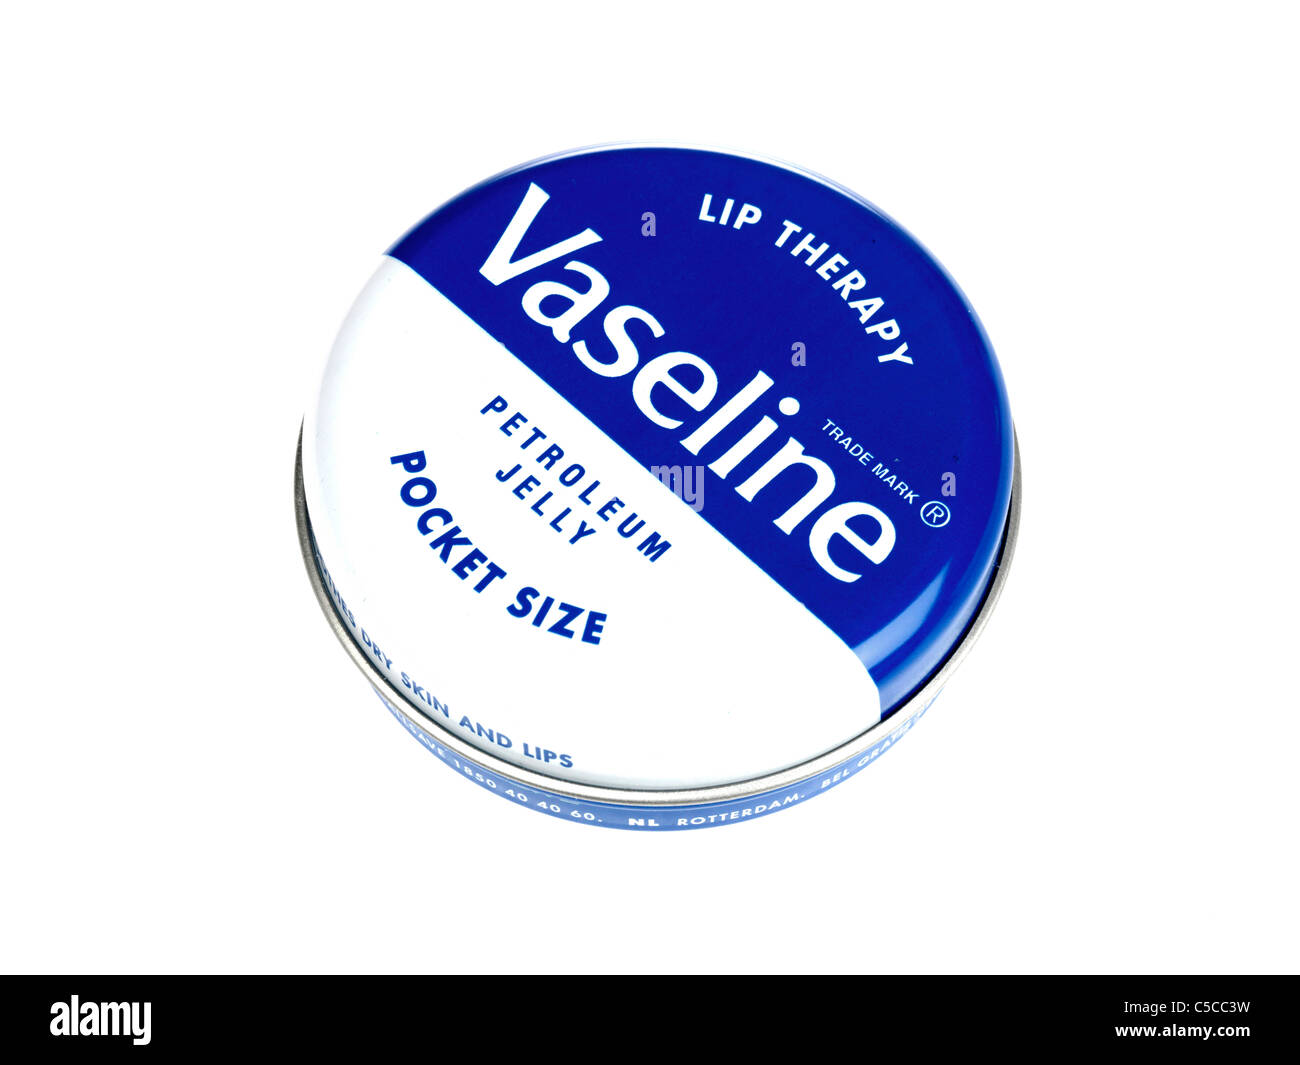 Tin Of Vaseline Petroleum Jelly Lip Balm Or Soother For Dry Lips Isolated Against A White Background With No People Stock Photo